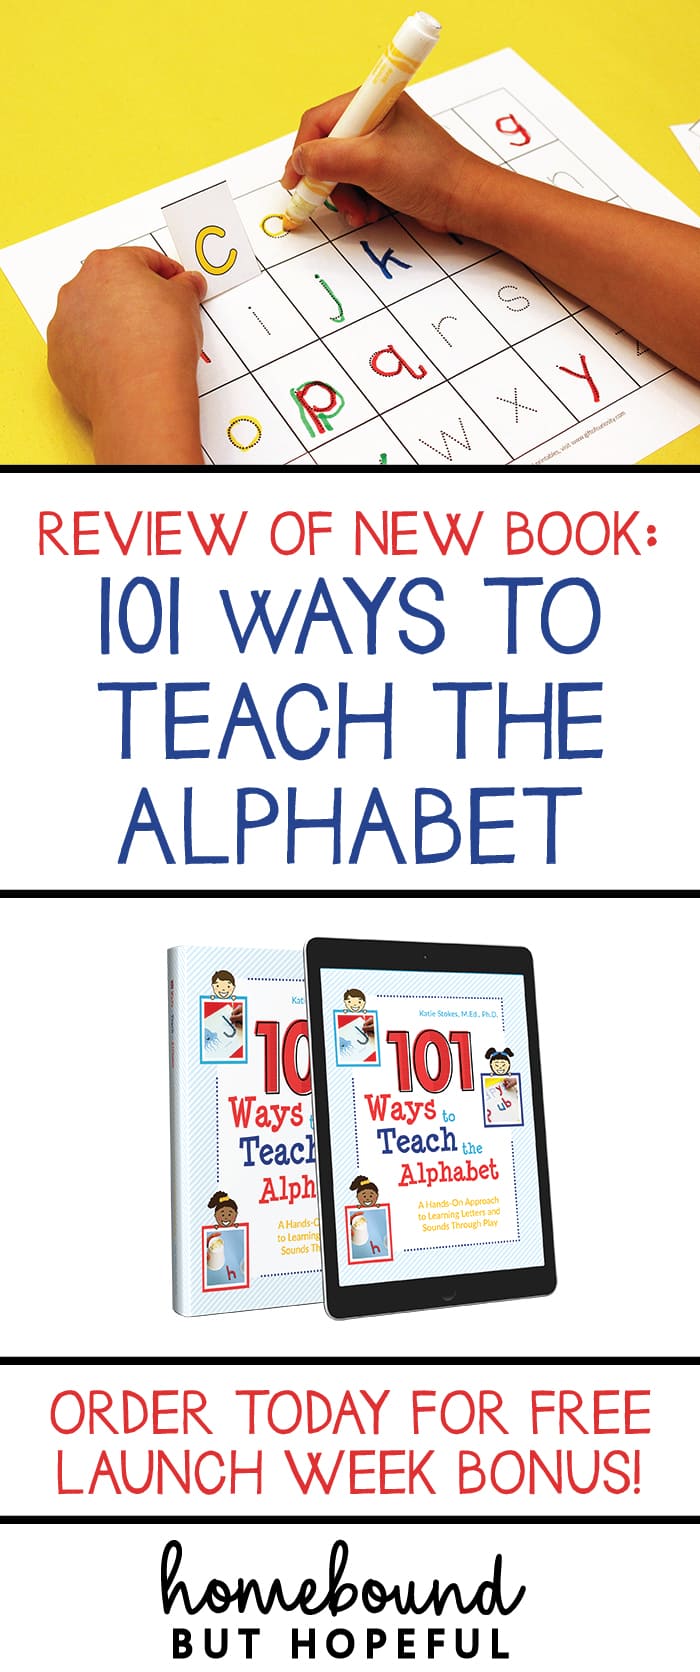 We got an early look at the incredible resource 101 Ways To Teach The Alphabet. This book and printables package is packed full of ideas to help your little ones master their A-B-Cs while having fun! Order during launch week to take advantage of savings and free bonus offers! Early Learning | Early Literacy | Homeschool